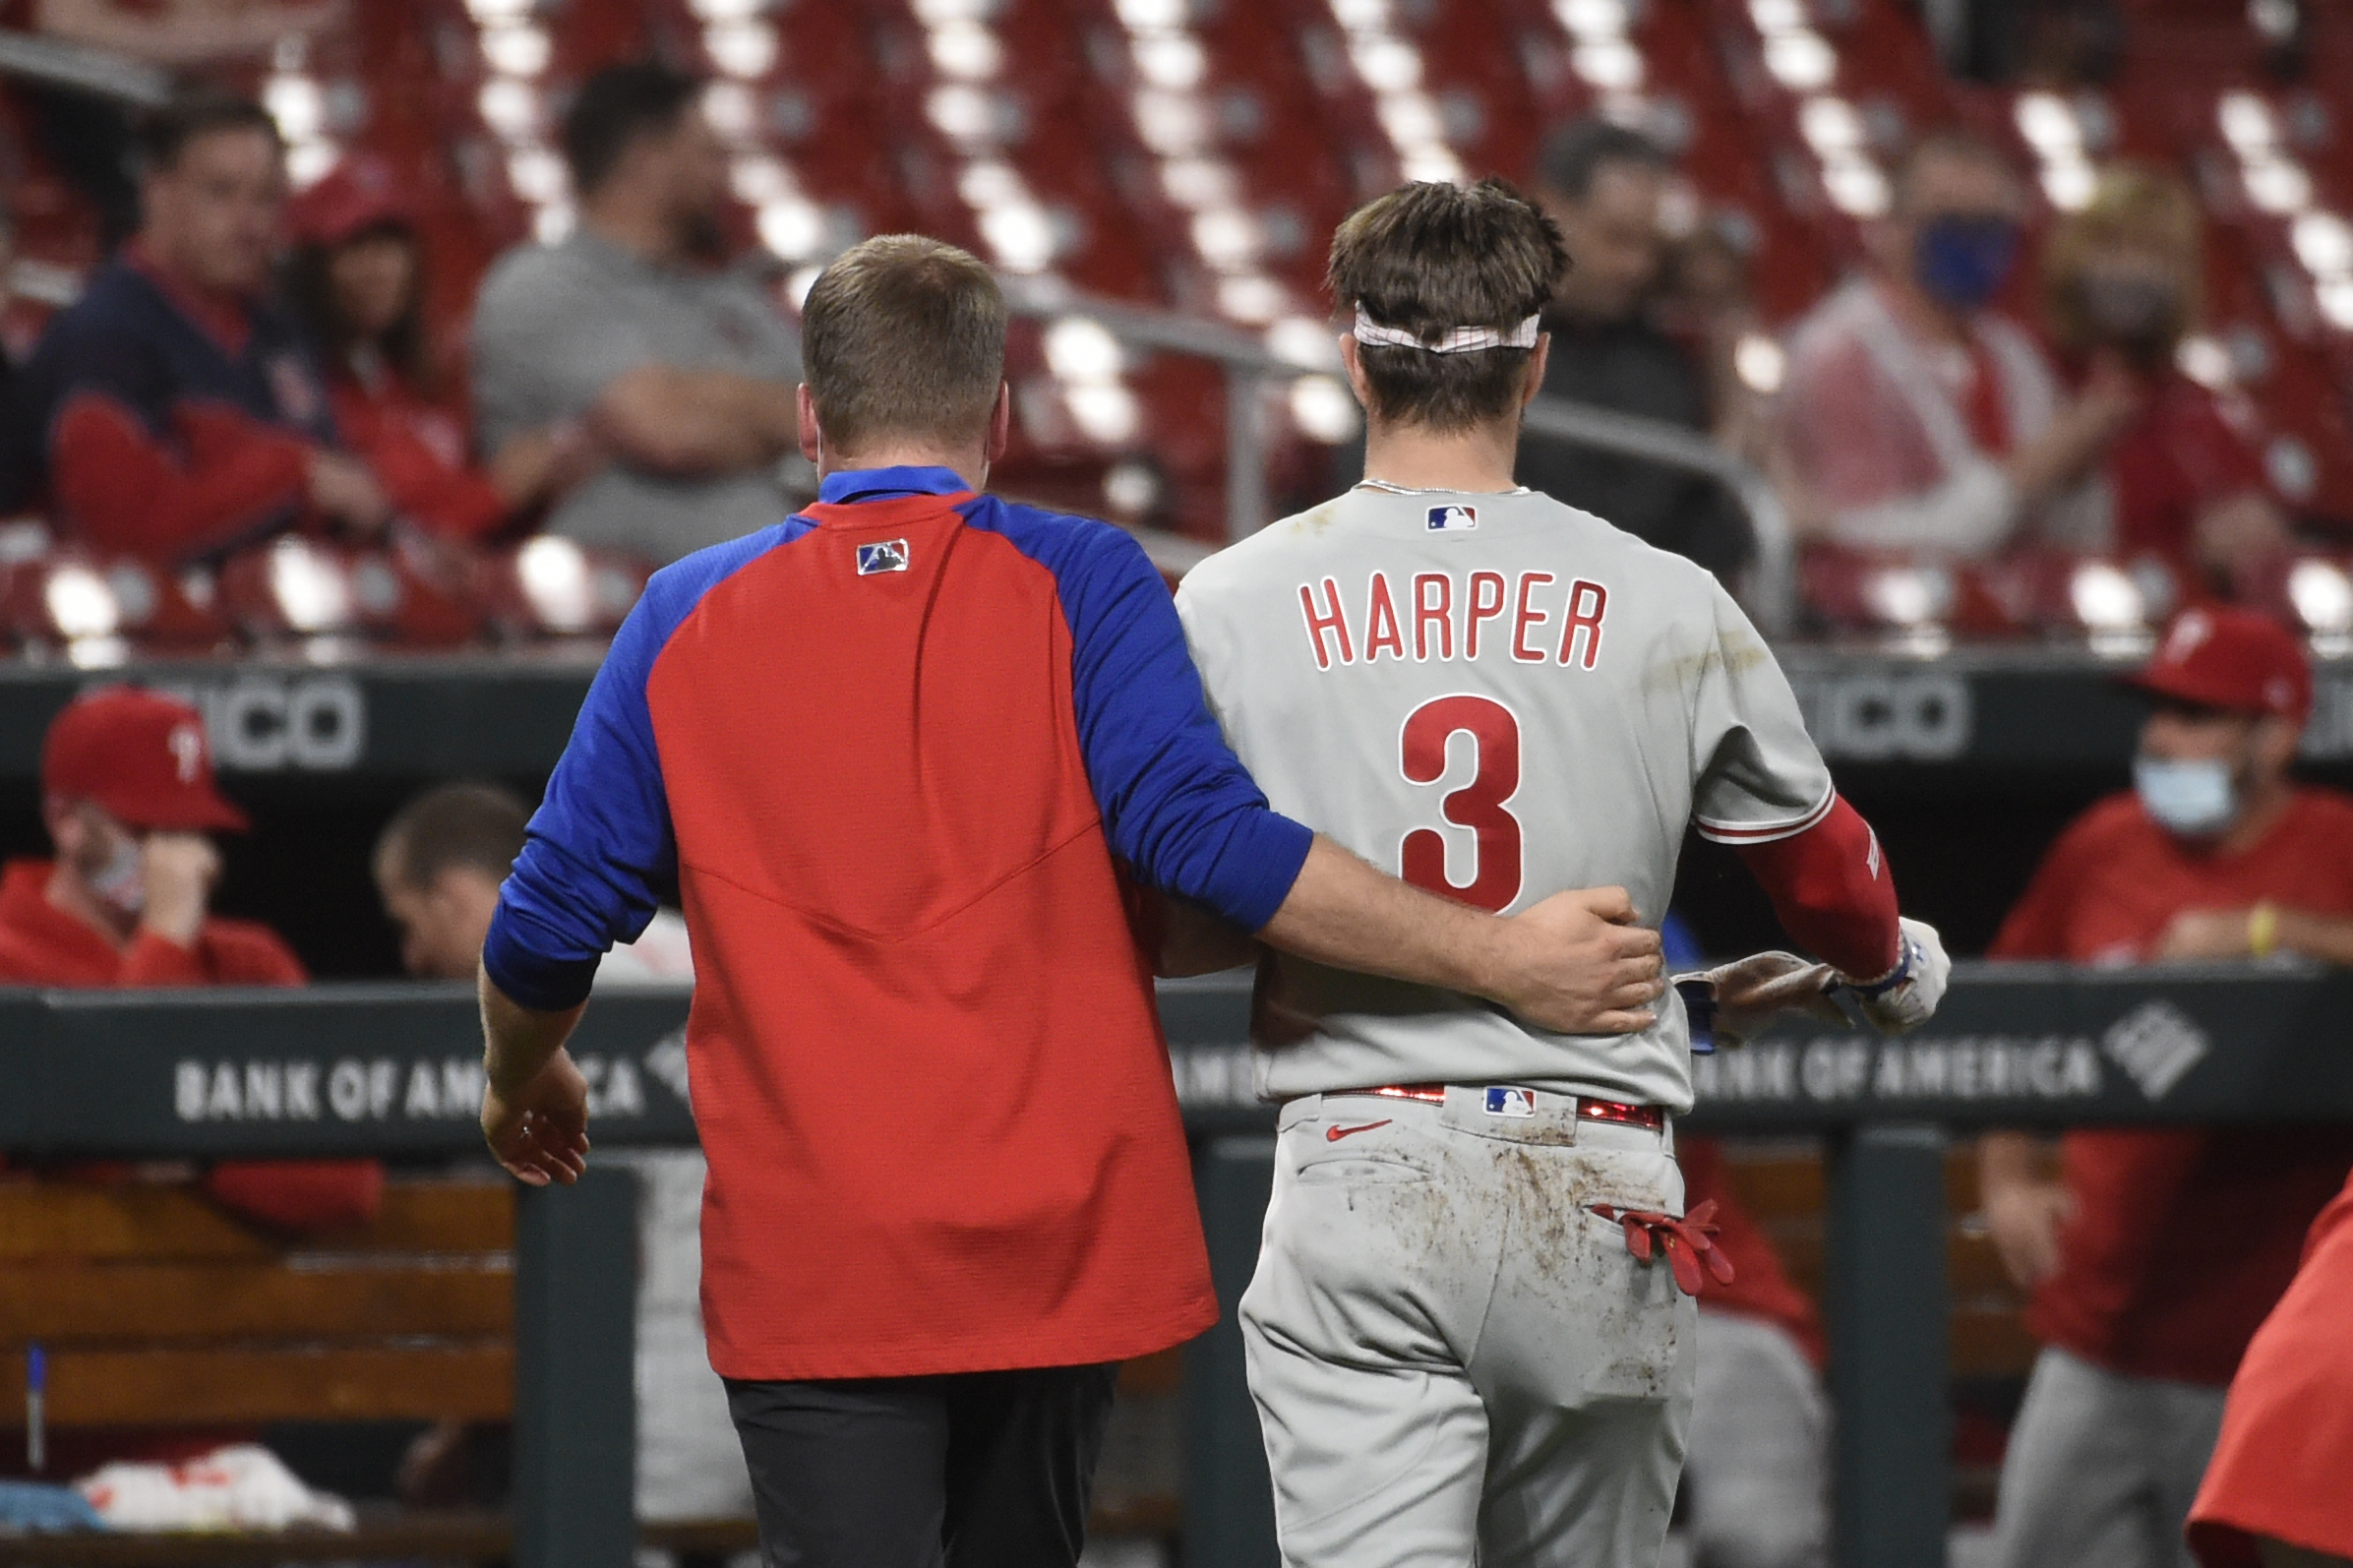 Phillies' Bryce Harper hit by pitch in face, walks off - The Boston Globe